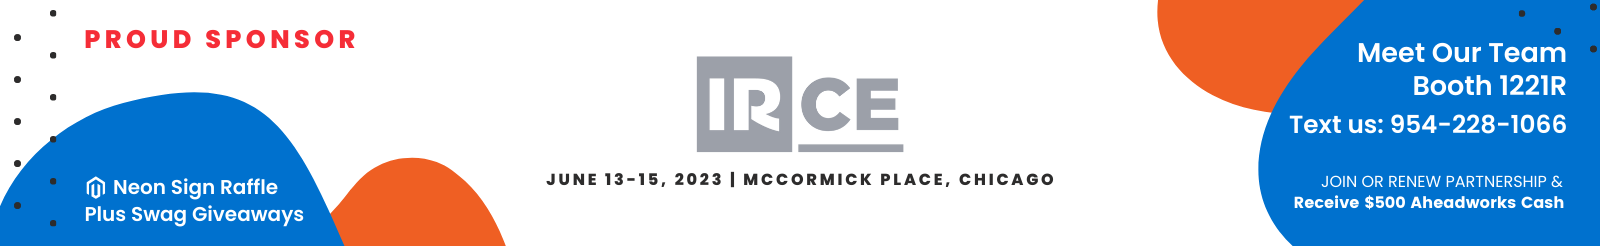 Meet Our Team      Booth 1221R      Text us: 954-228-1066      PROUD SPONSOR      IRCE      June 13-15, 2023 | MCCORMICK PLACE, CHICAGO      Neon Sign Raffle